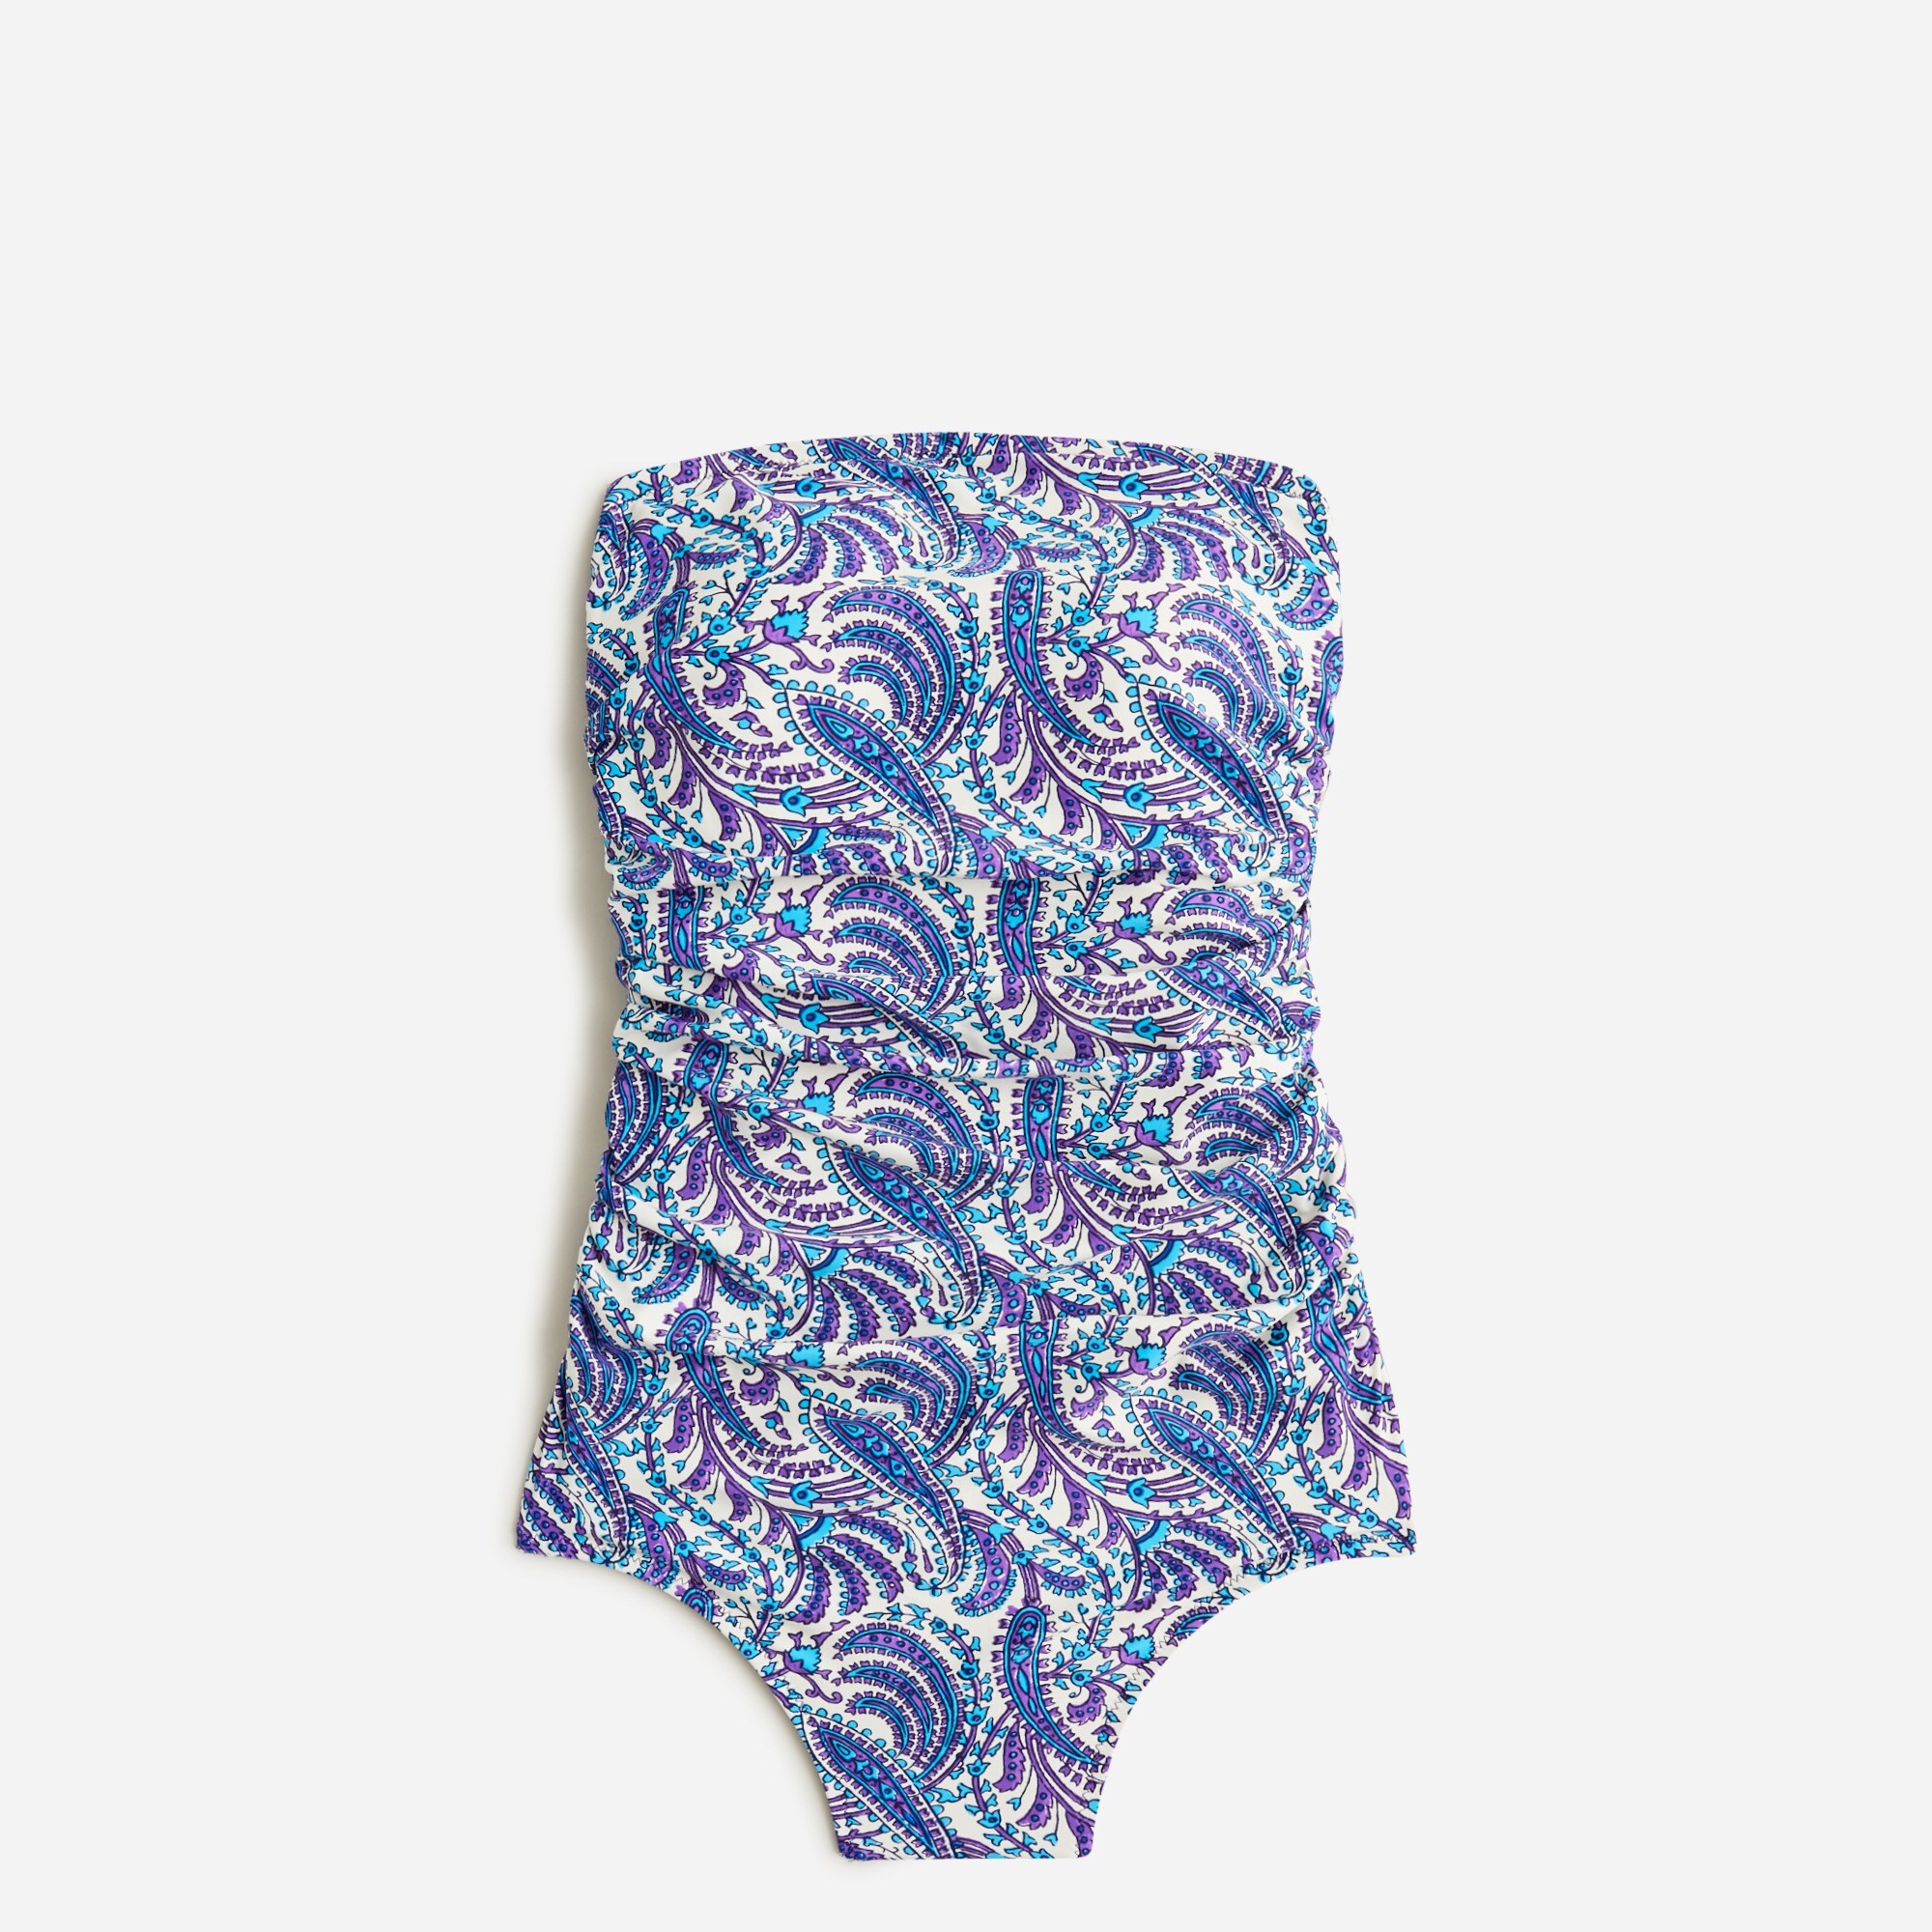  Ruched bandeau one-piece swimsuit in purple paisley